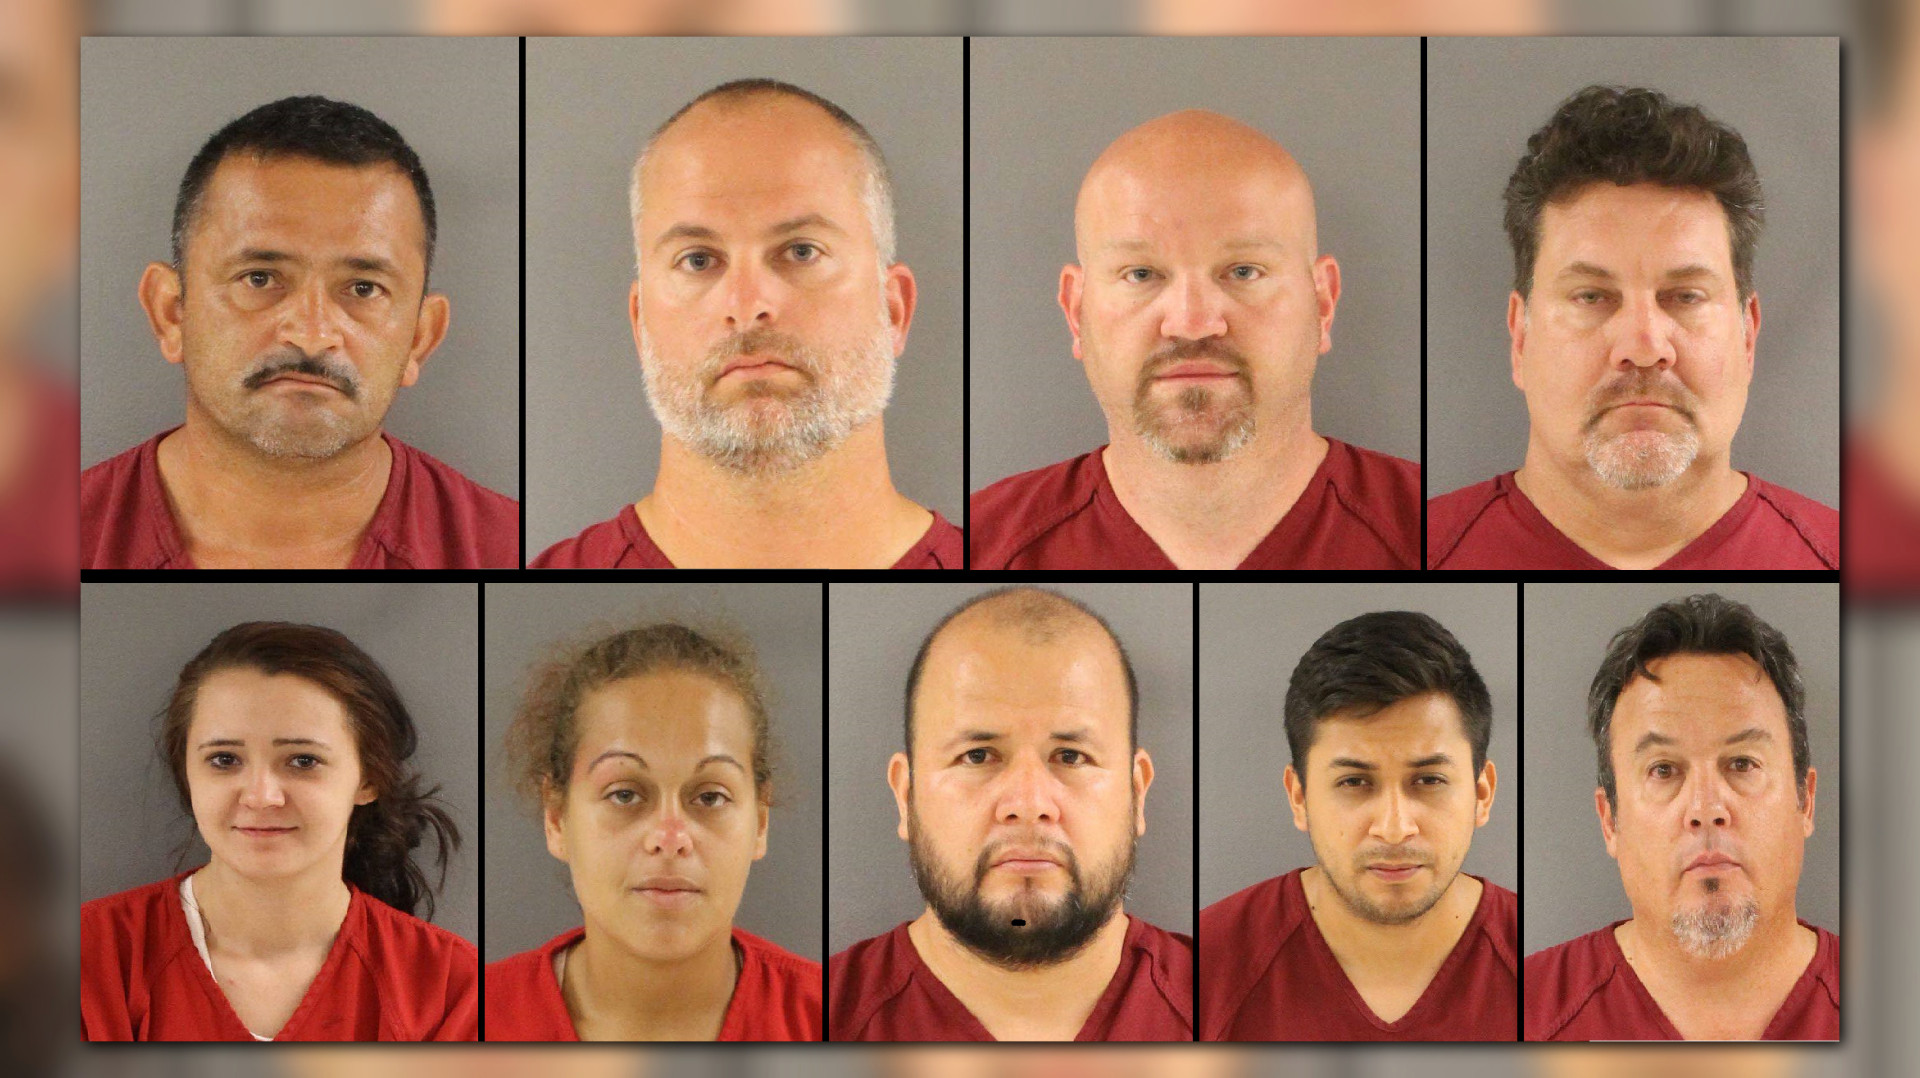 Knox County Vice Unit Arrests Nine In Prostitution Sting